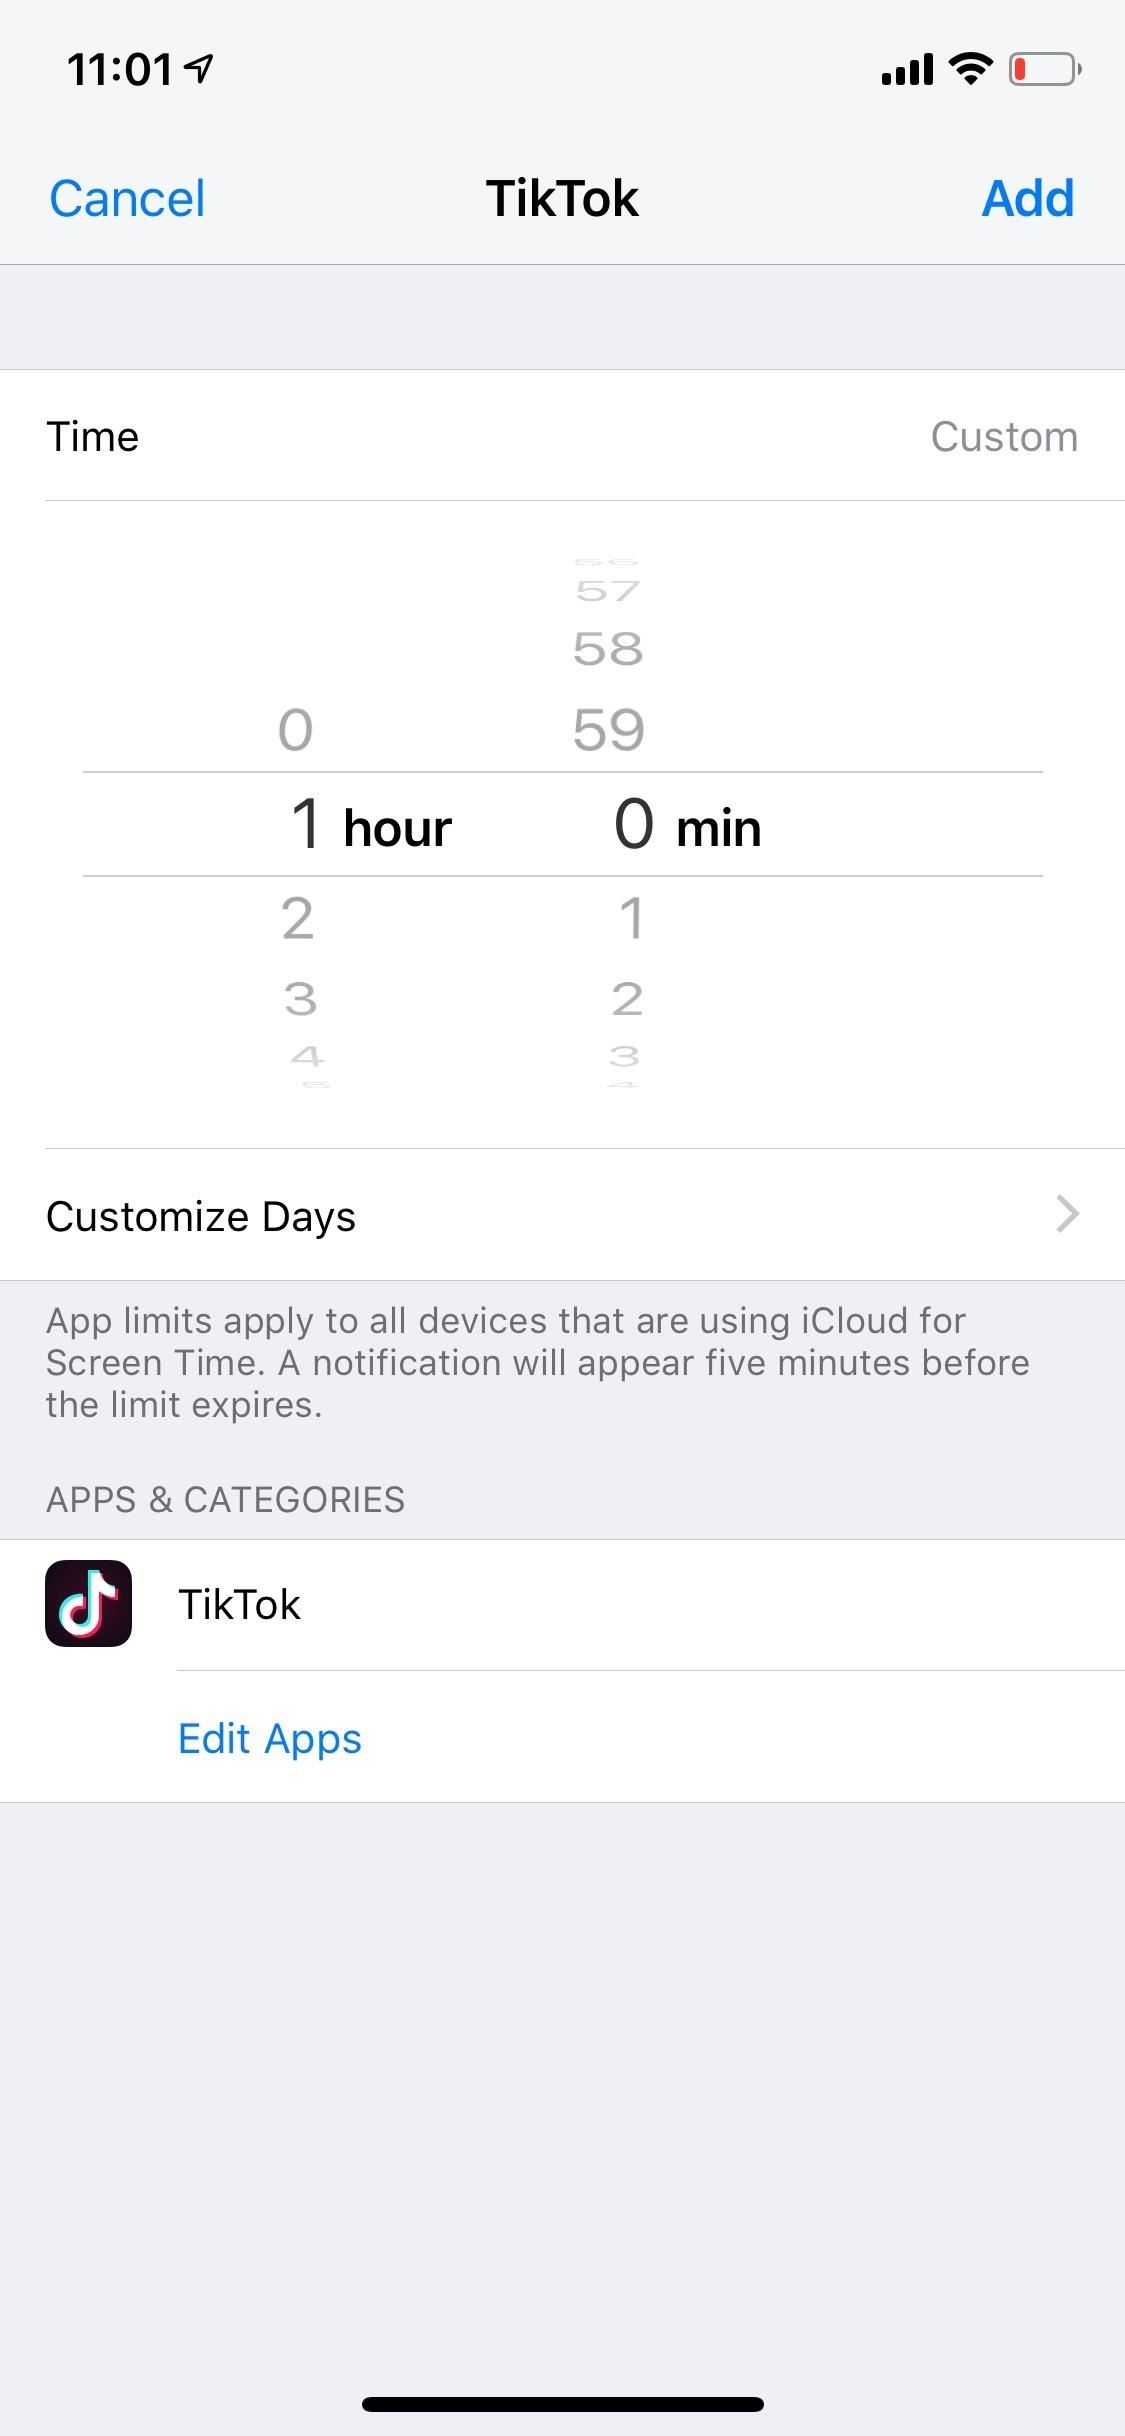 How to Limit Your Kid's TikTok Usage on Their iPhone